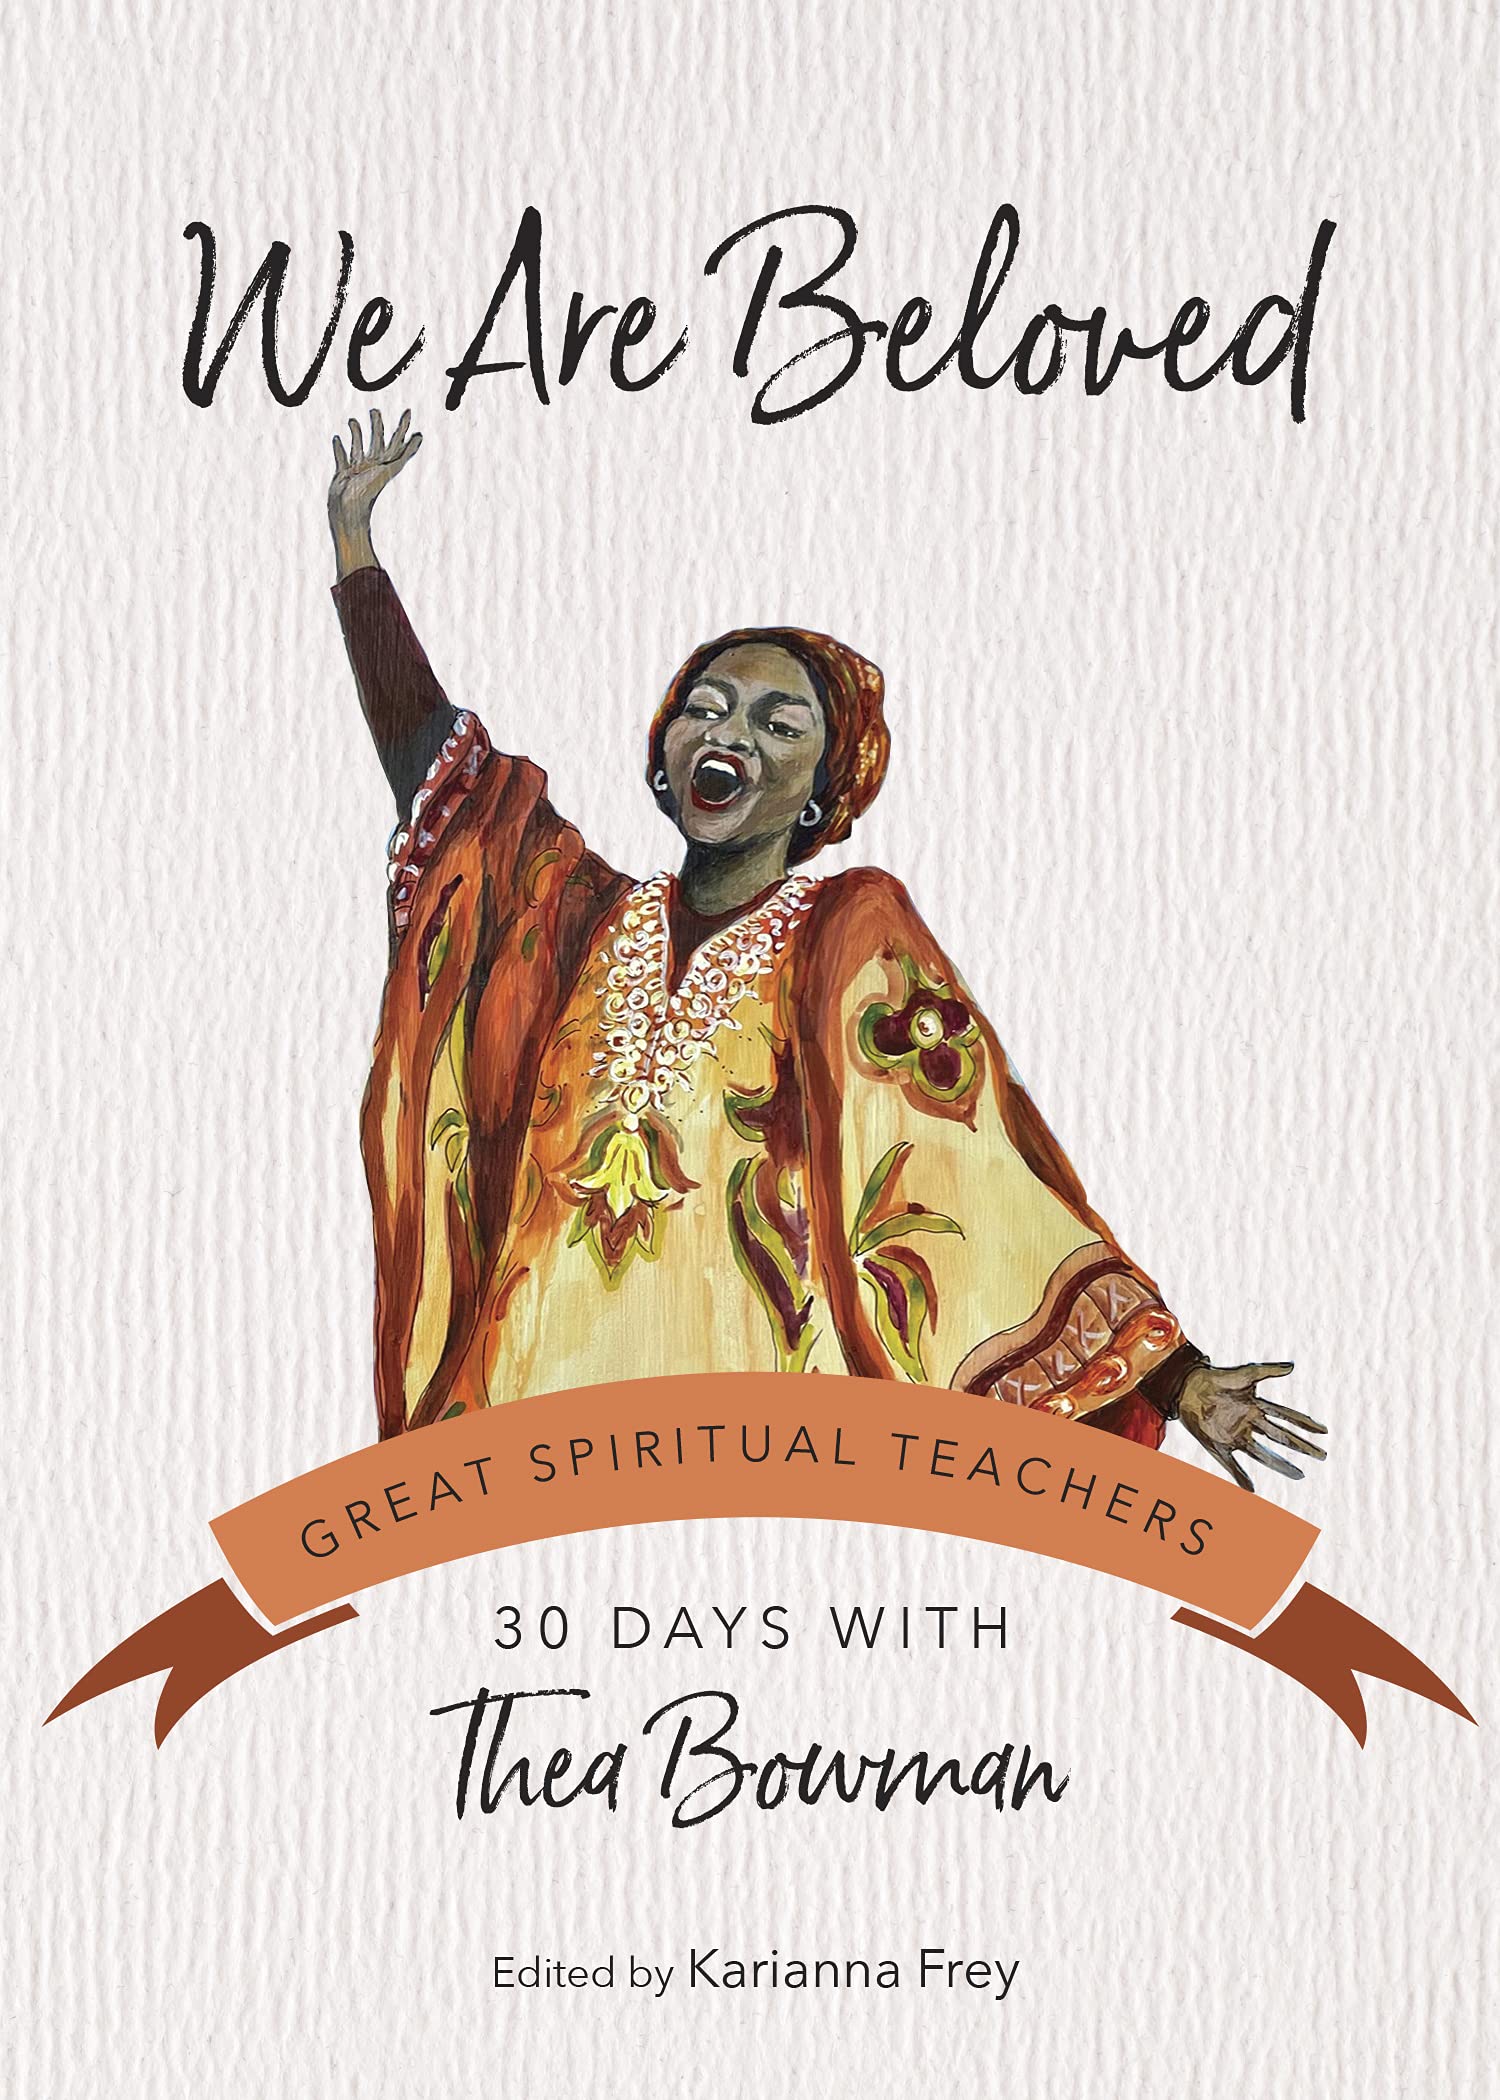 Reflection: "We are beloved"—an oft-needed reminder from Servant of God Thea Bowman